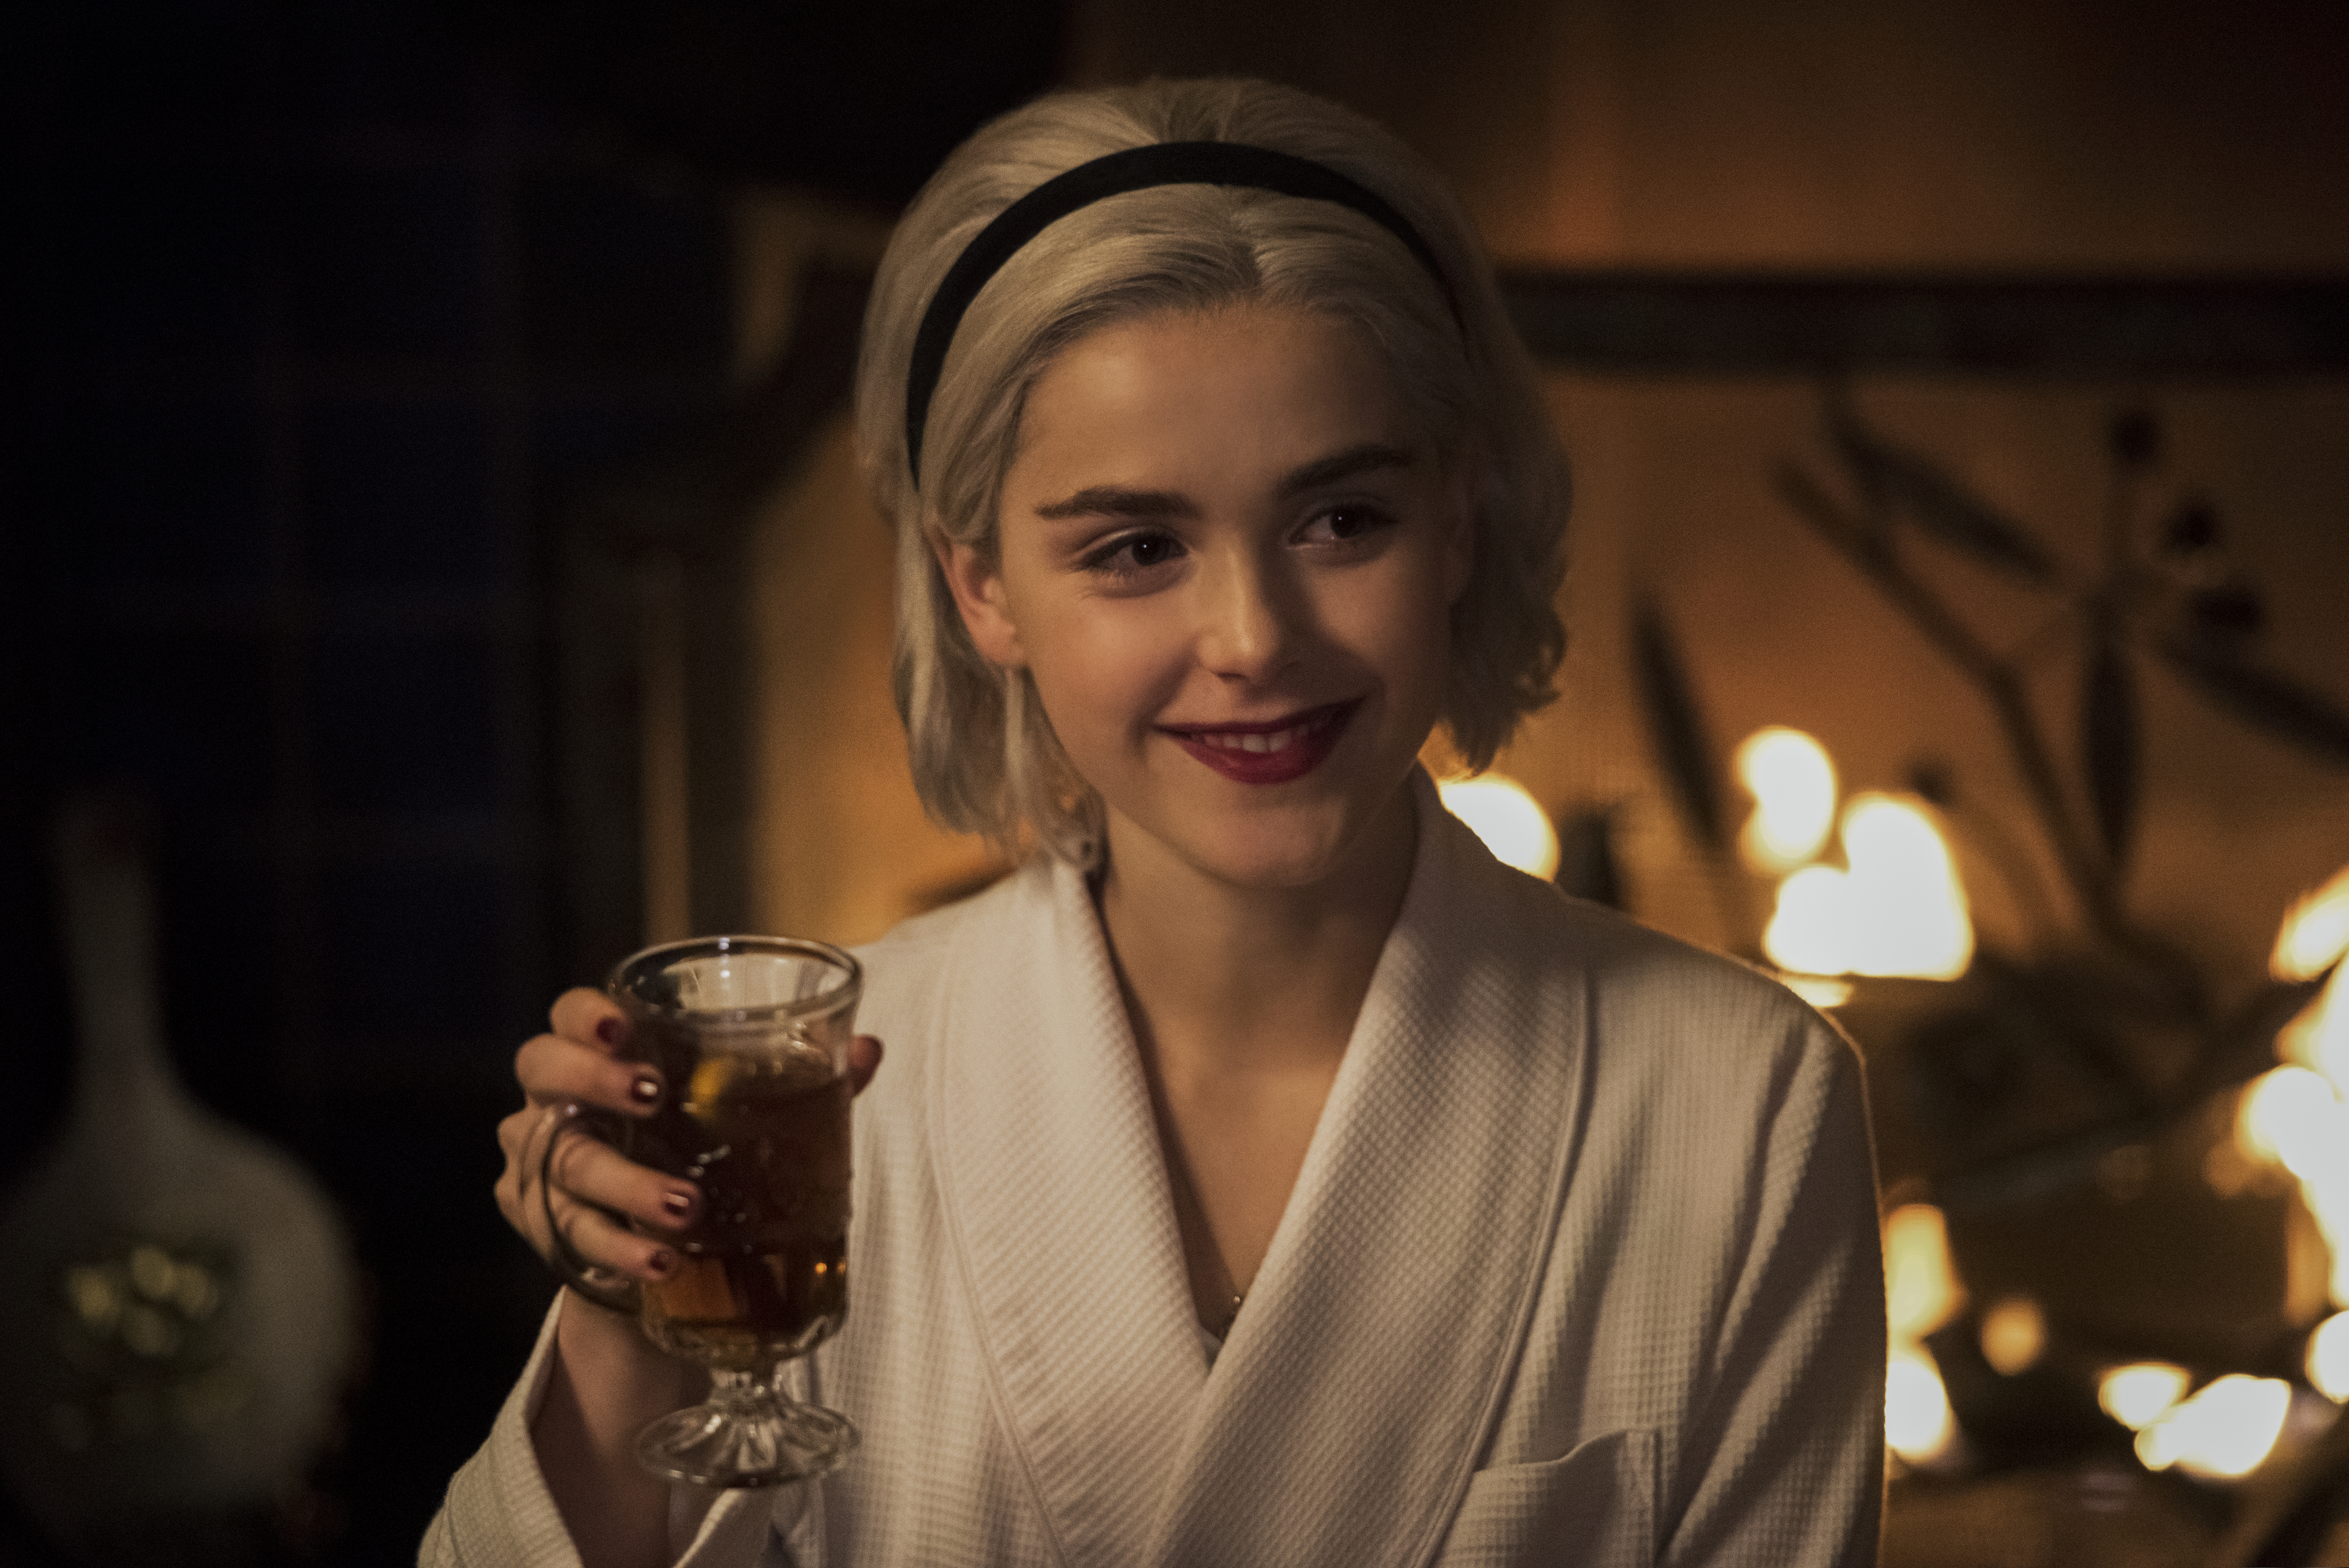 We officially have an air date for the third season of Chilling Adventures of Sabrina